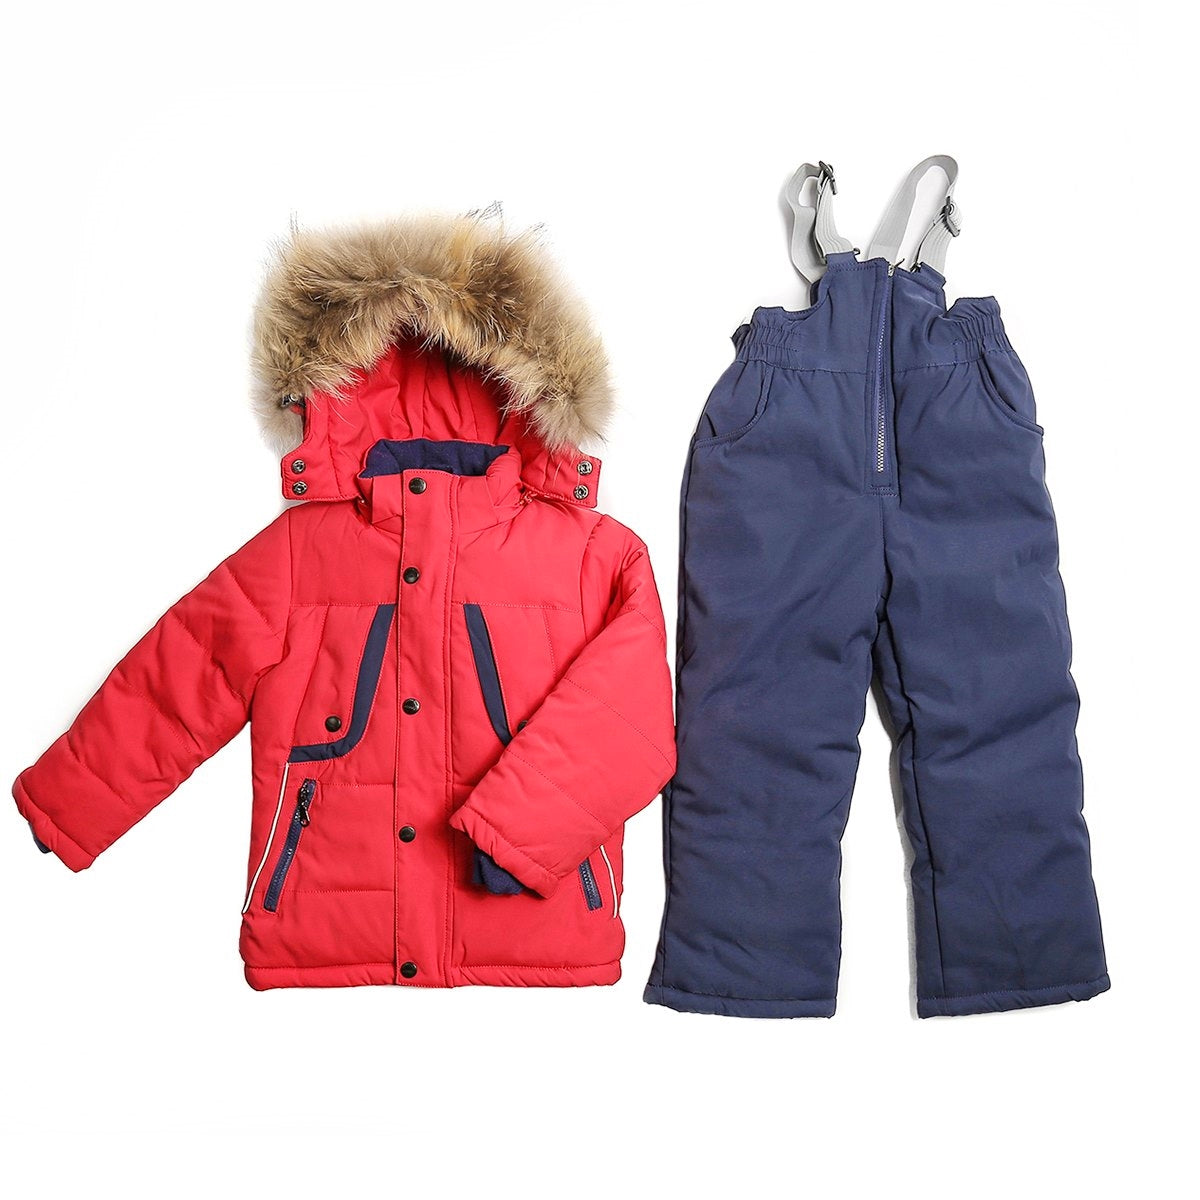 Only 45.00 usd for Toddler Boys 3-Piece Winter Stylish Jacket Sheep Wool  Vest Overall Red Set 2 years Online at the Shop